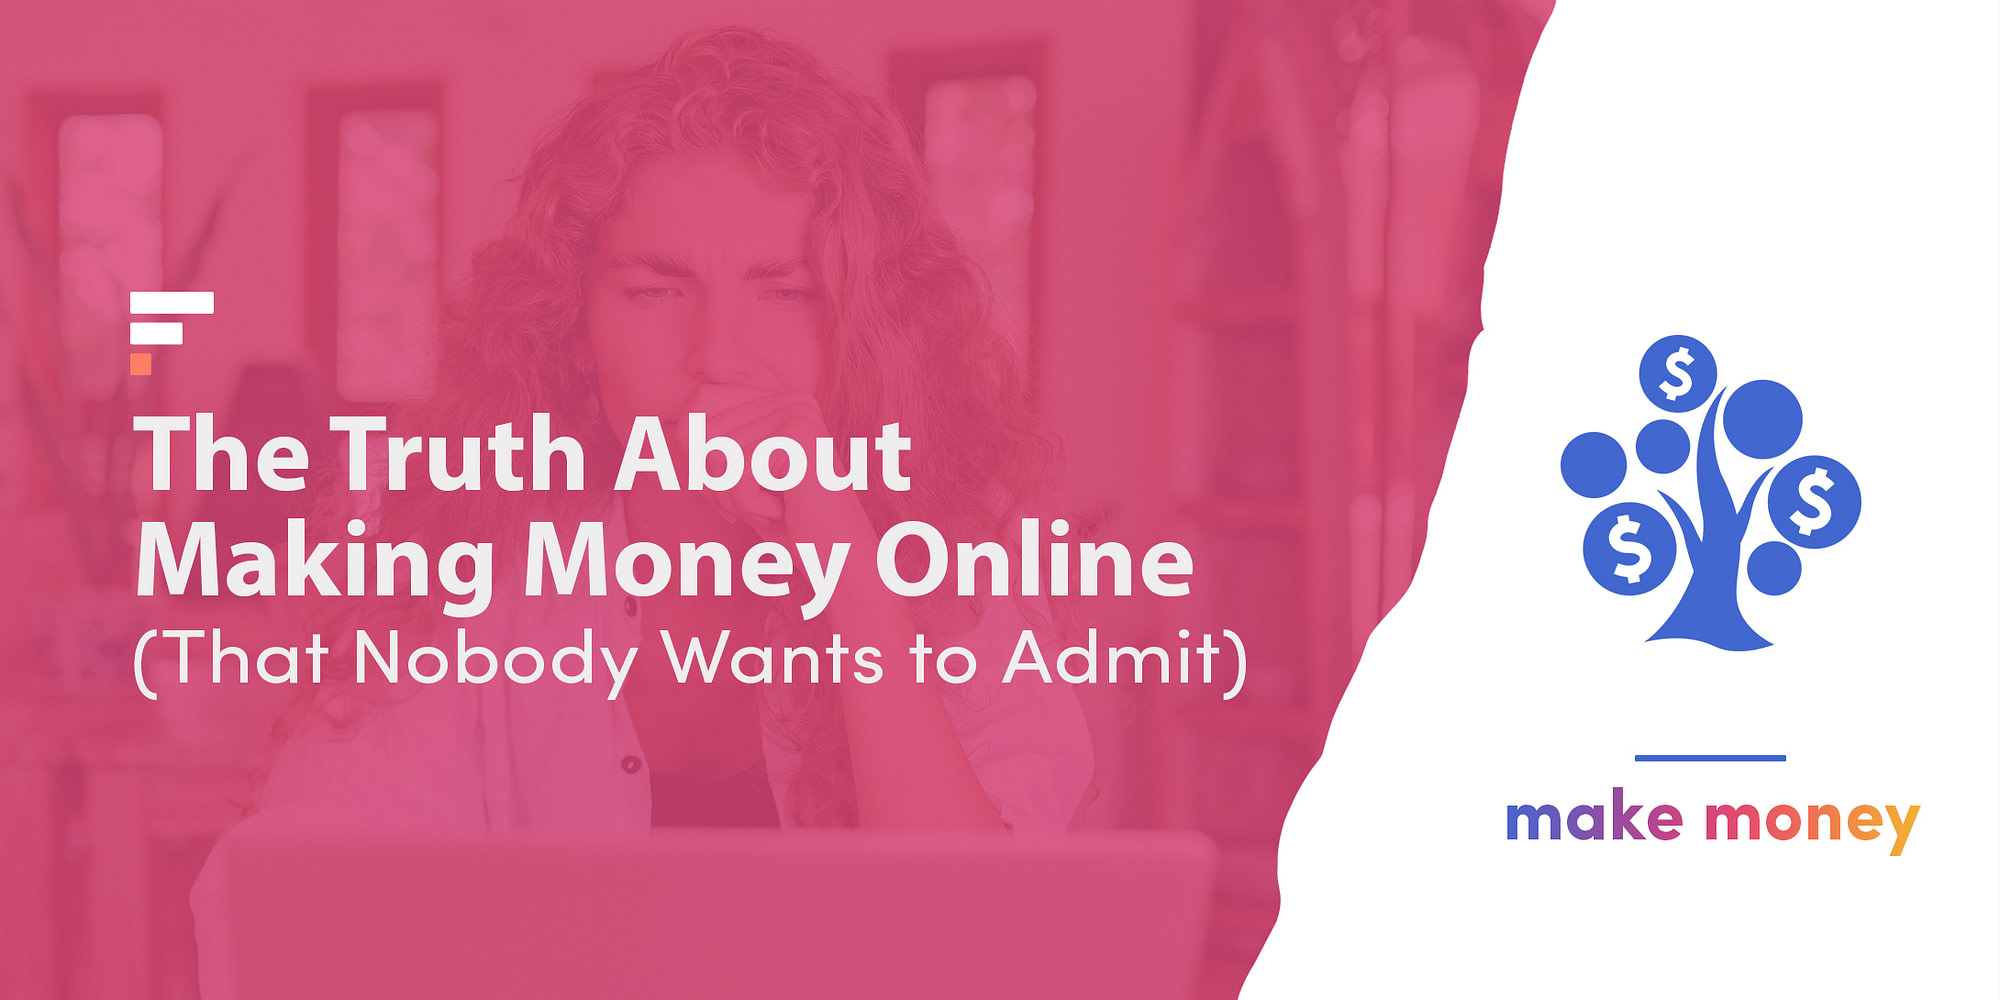 7 Ways to Make Money Online (And the Reality Behind Them)